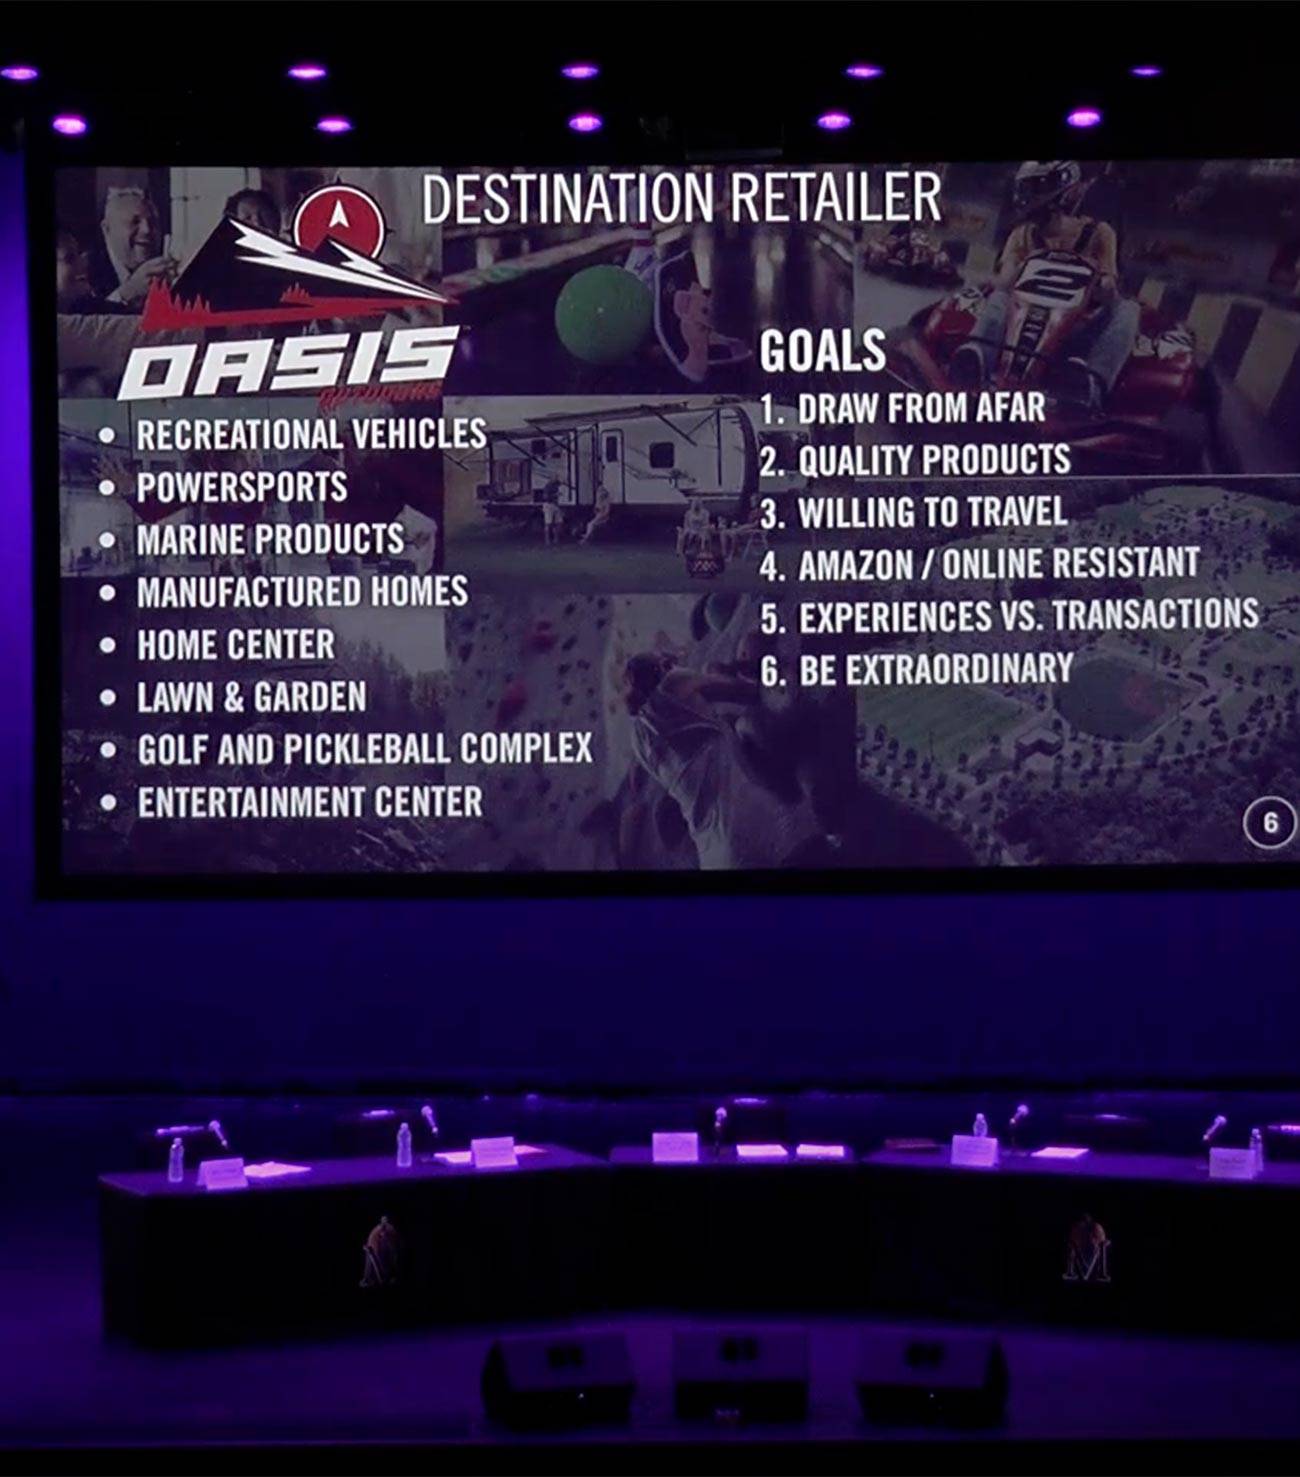 Picture of powerpoint screen of Oasis destination retailer plans